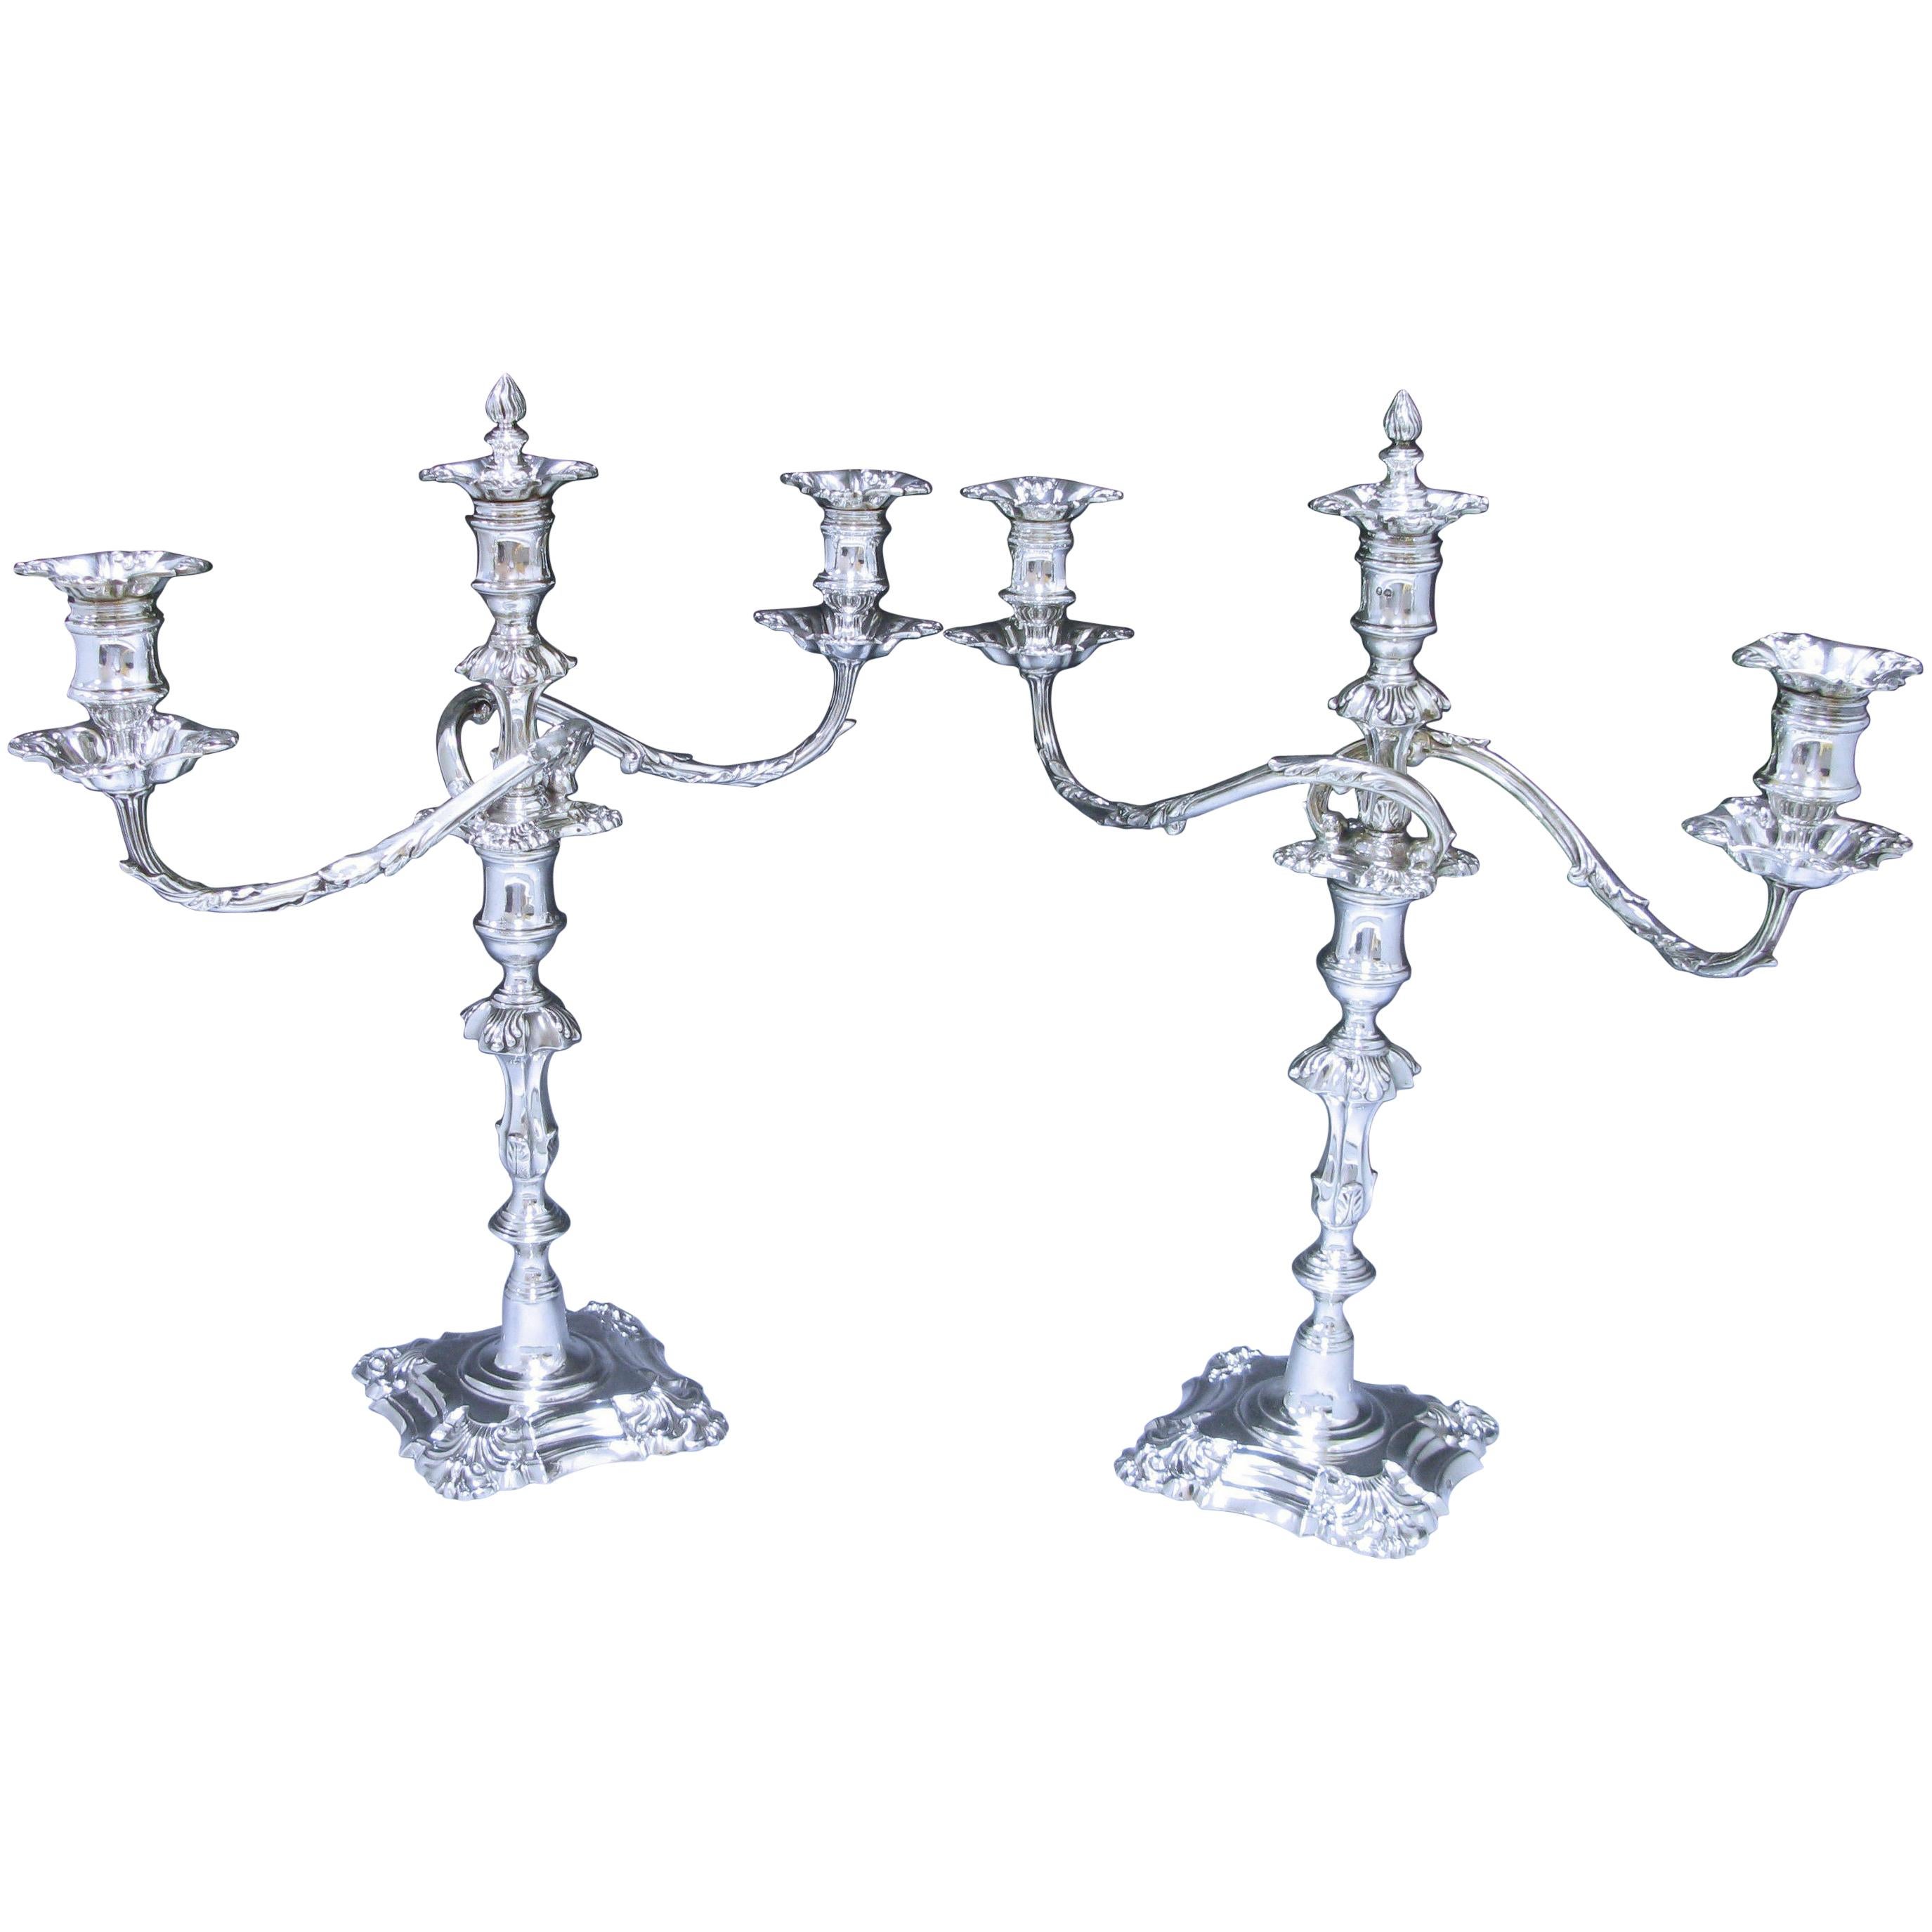 Pair of George iv Antique Silver Three-Light Candelabra For Sale